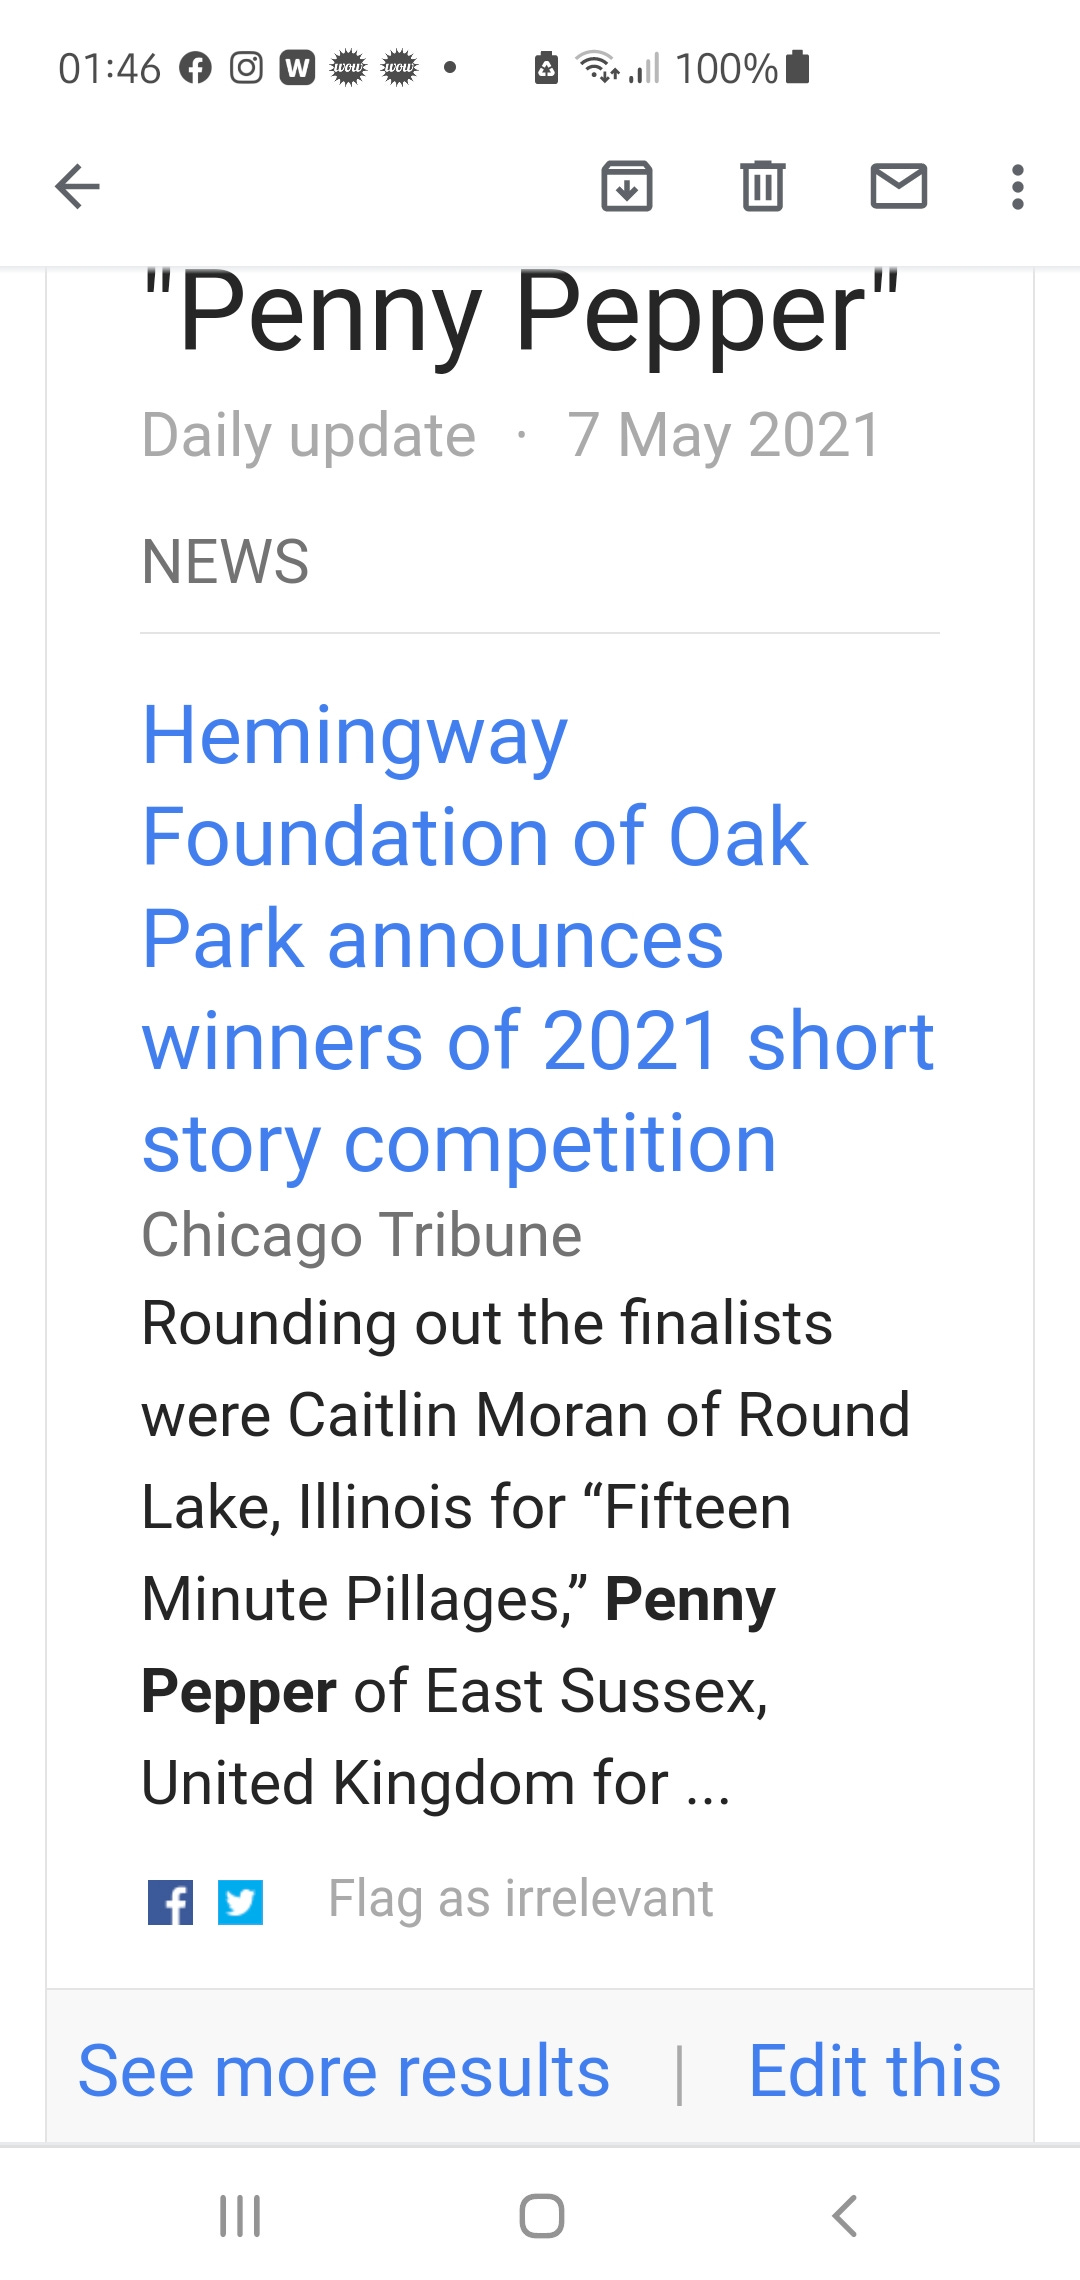 Image shows a screenshot of Penny’s phone, with a Google news notification that reads ‘Hemingway Foundation of Oak Park announces winners of 2021 short story competition. Chicago Tribune. Rounding out the finalists were Caitlan Moran of Round Lake, Illinois for “Fifteen Minute Pillages,” Penny Pepper of East Sussex, United Kingdom for…’.